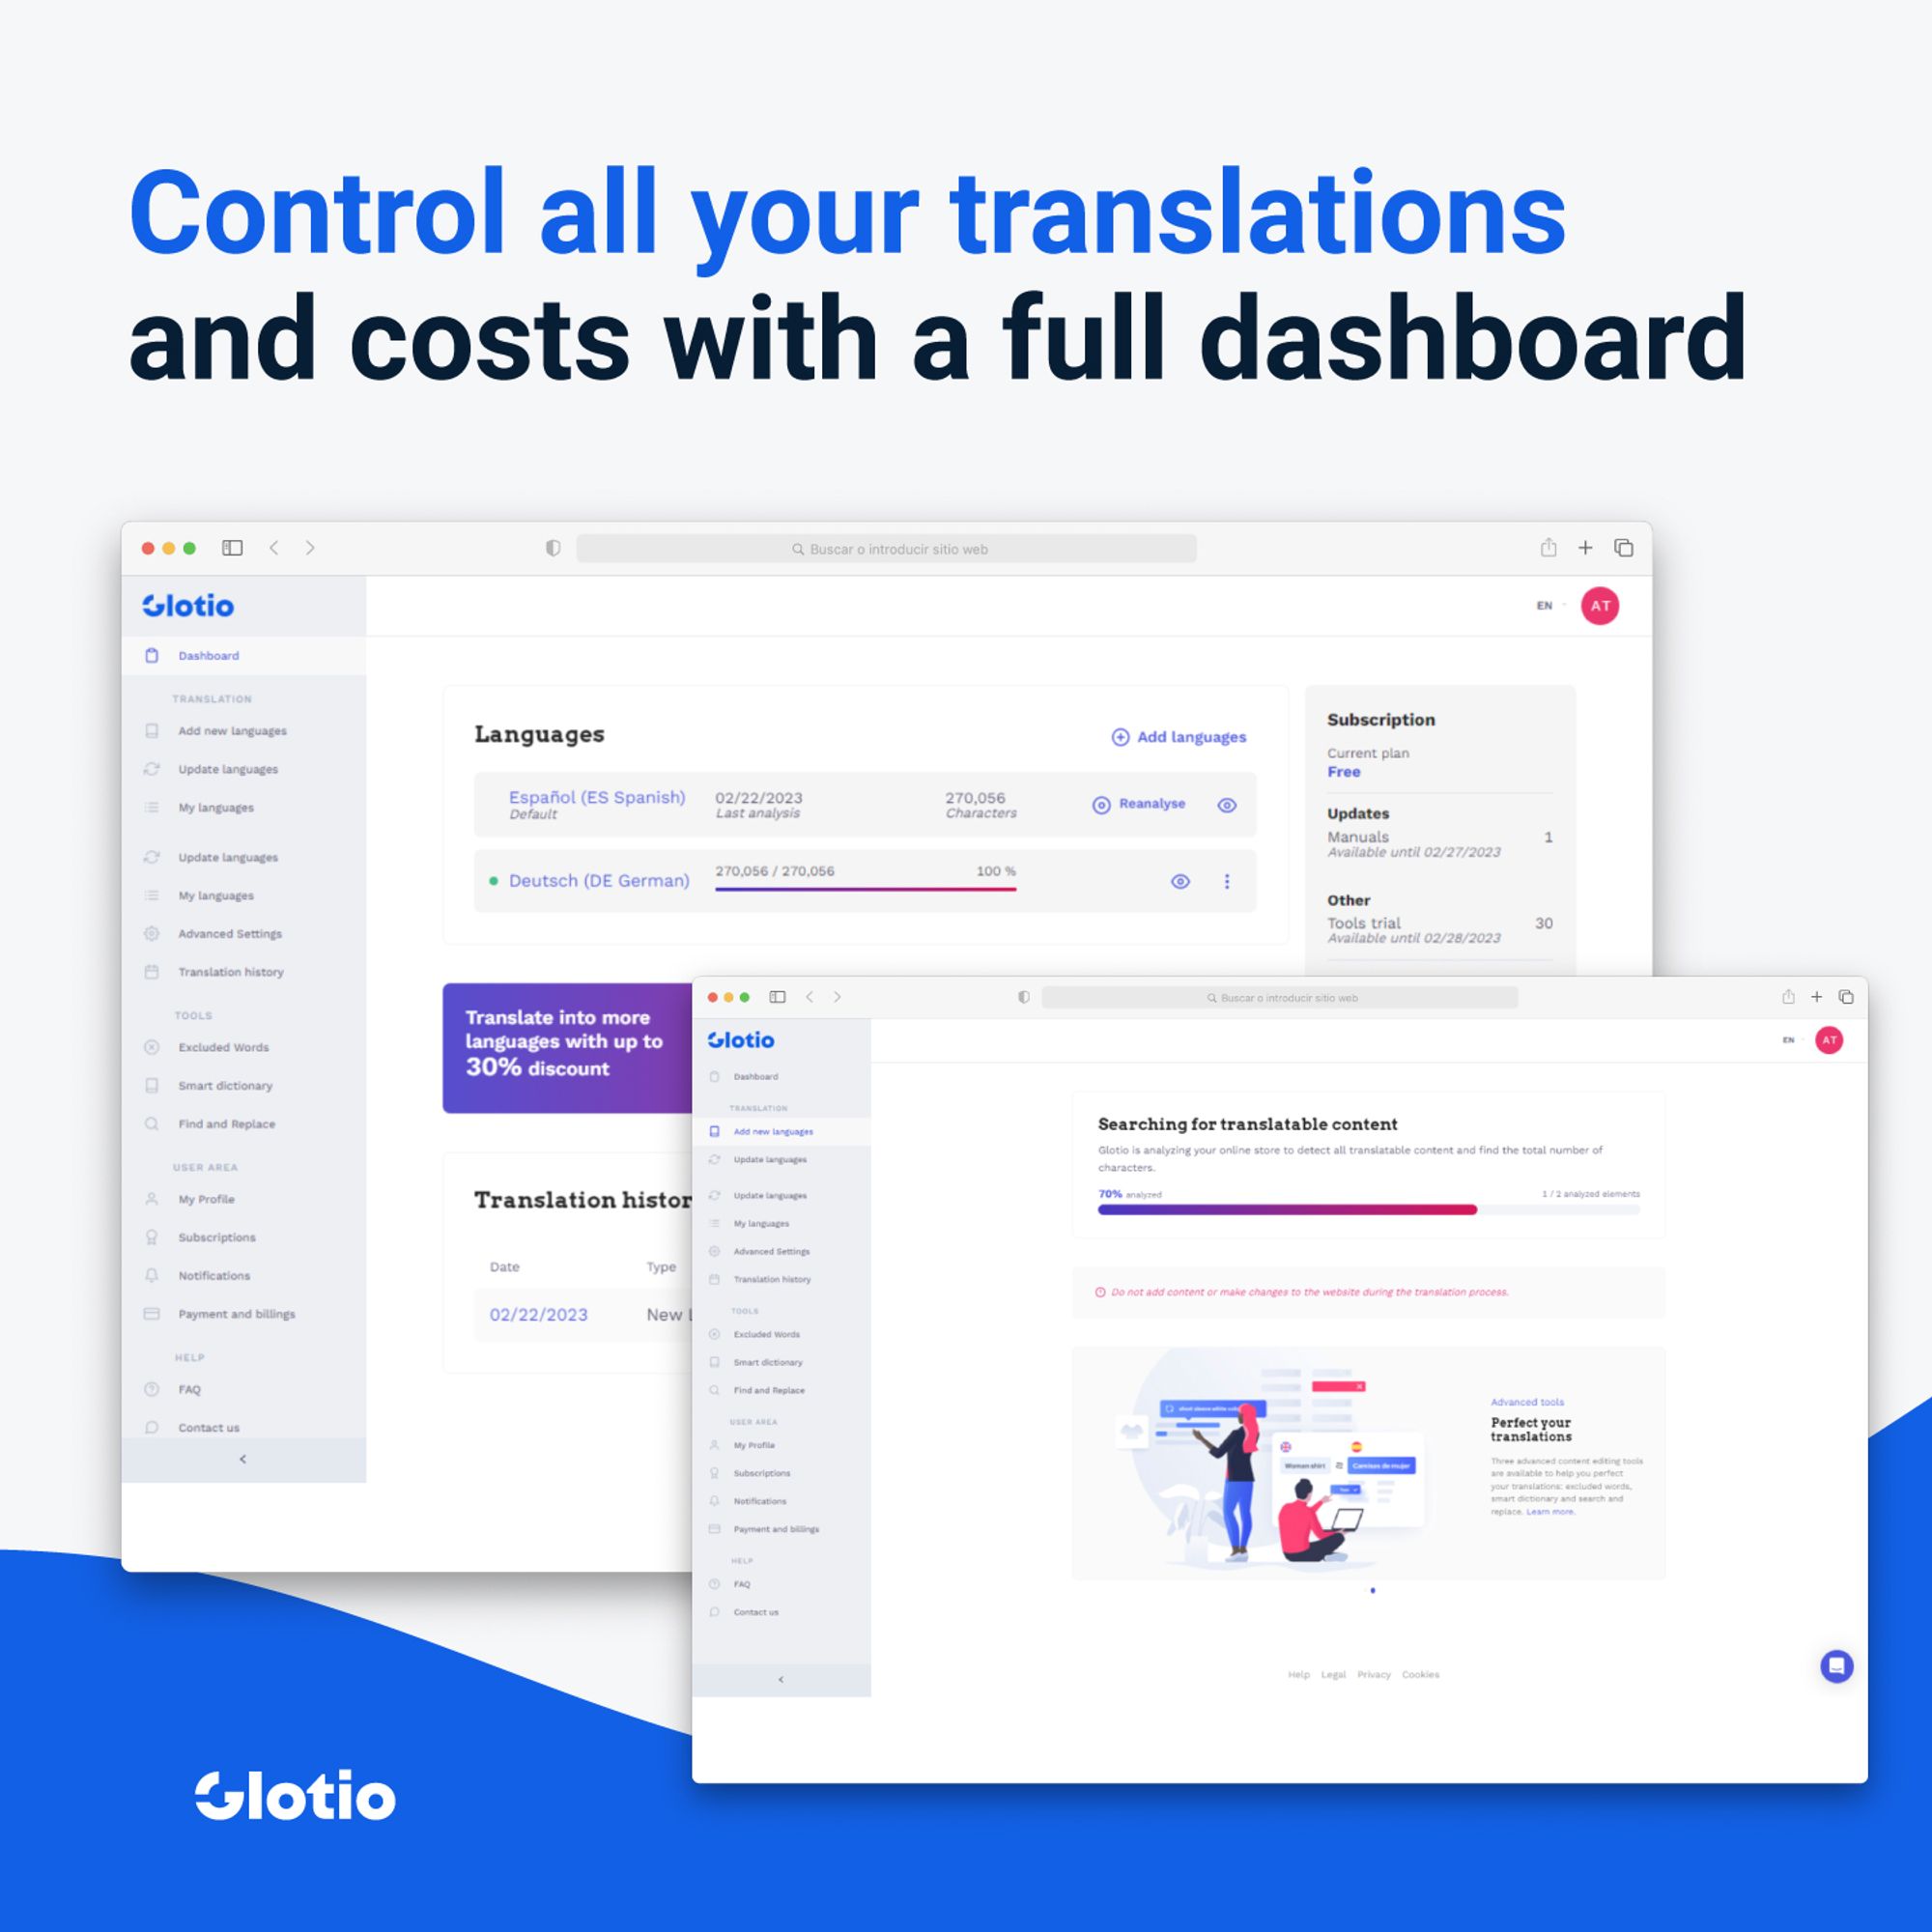 The system will automatically calculate the number of characters to translate, and you can start translating, simply by clicking Translate Now.  Glotio will analyze your online store, monitoring the entire web to check all the translatable texts